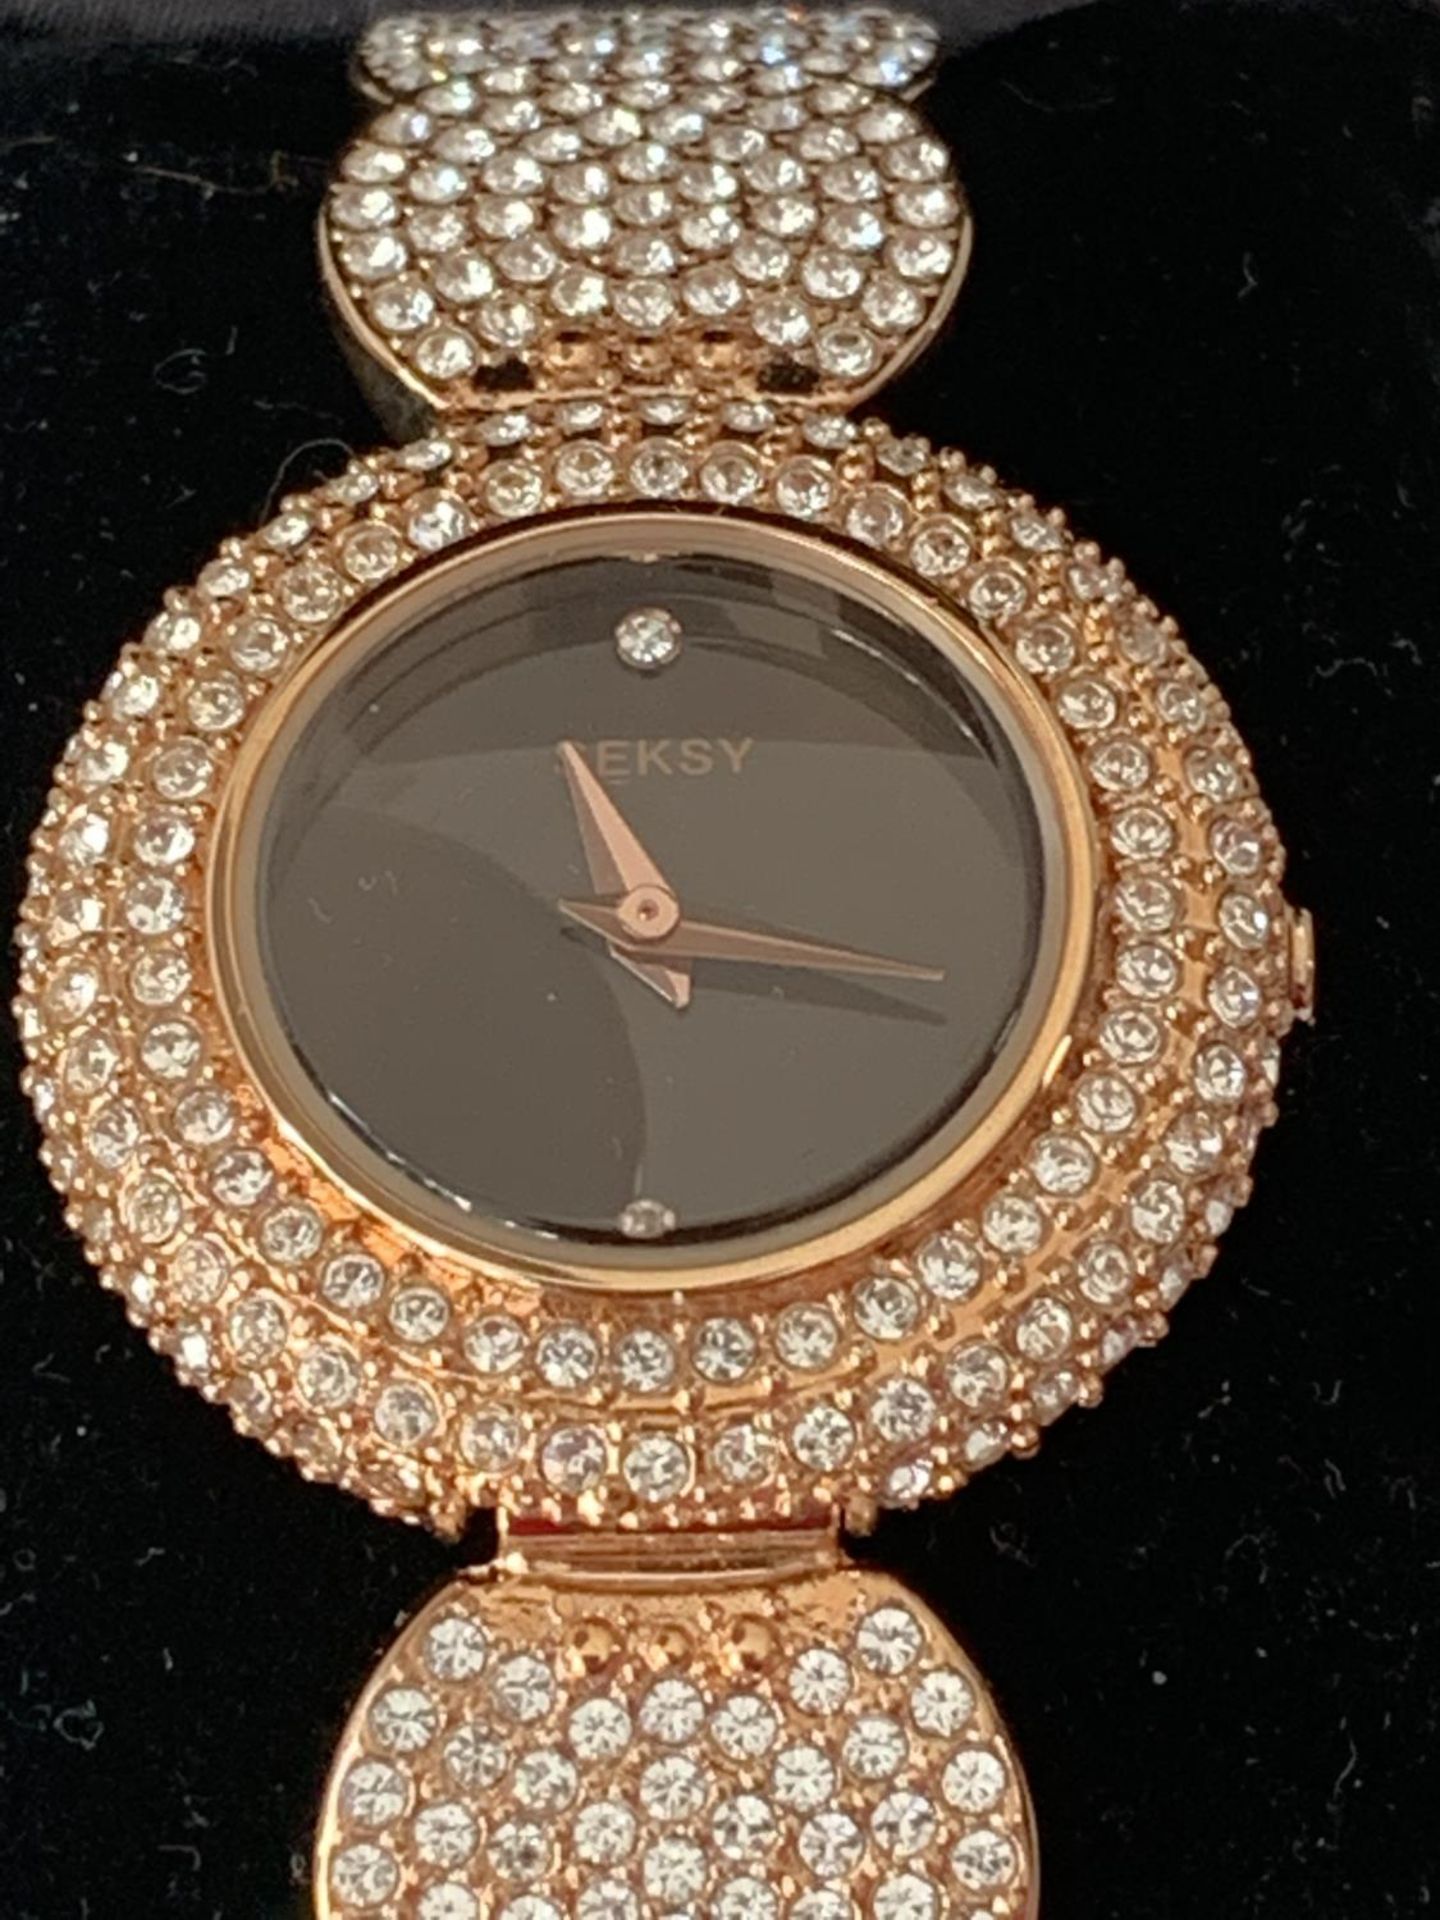 A SESKY WRIST WATCH IN A PRESENTATION BOX SEEN WORKING BUT NO WARRANTY - Image 3 of 3